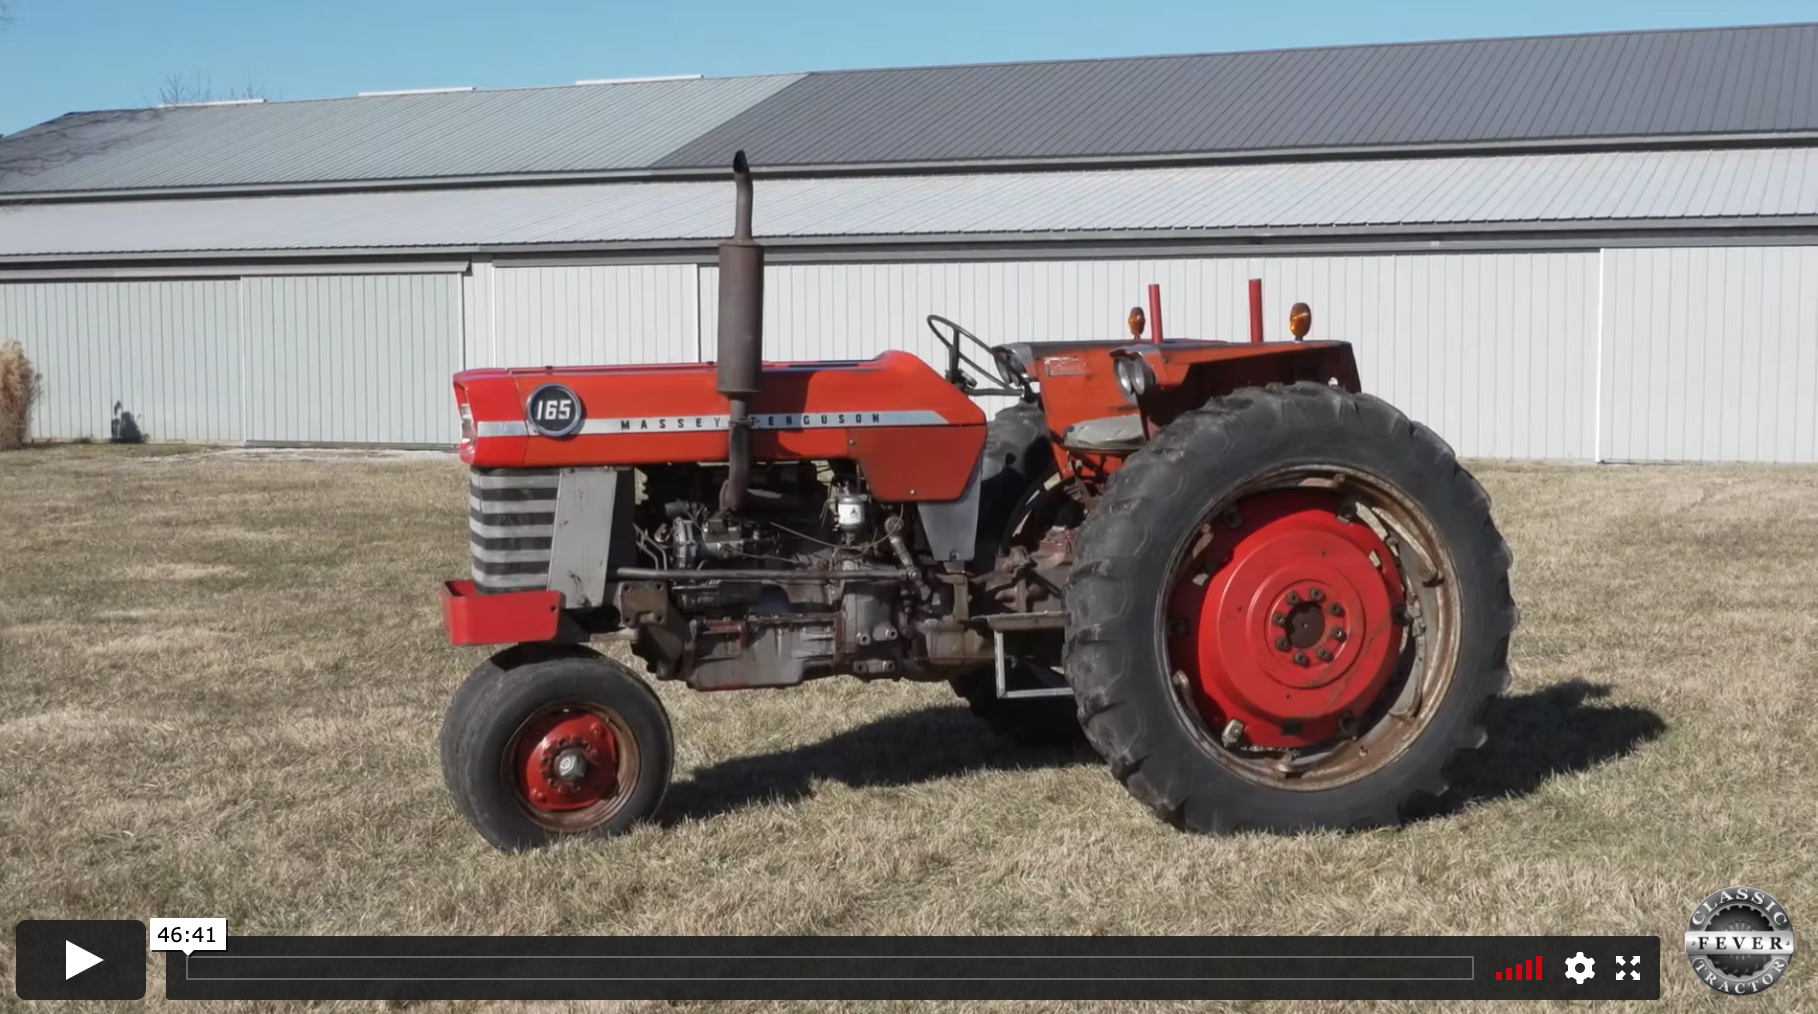 Watch the Latest Episode of Classic Tractor Fever